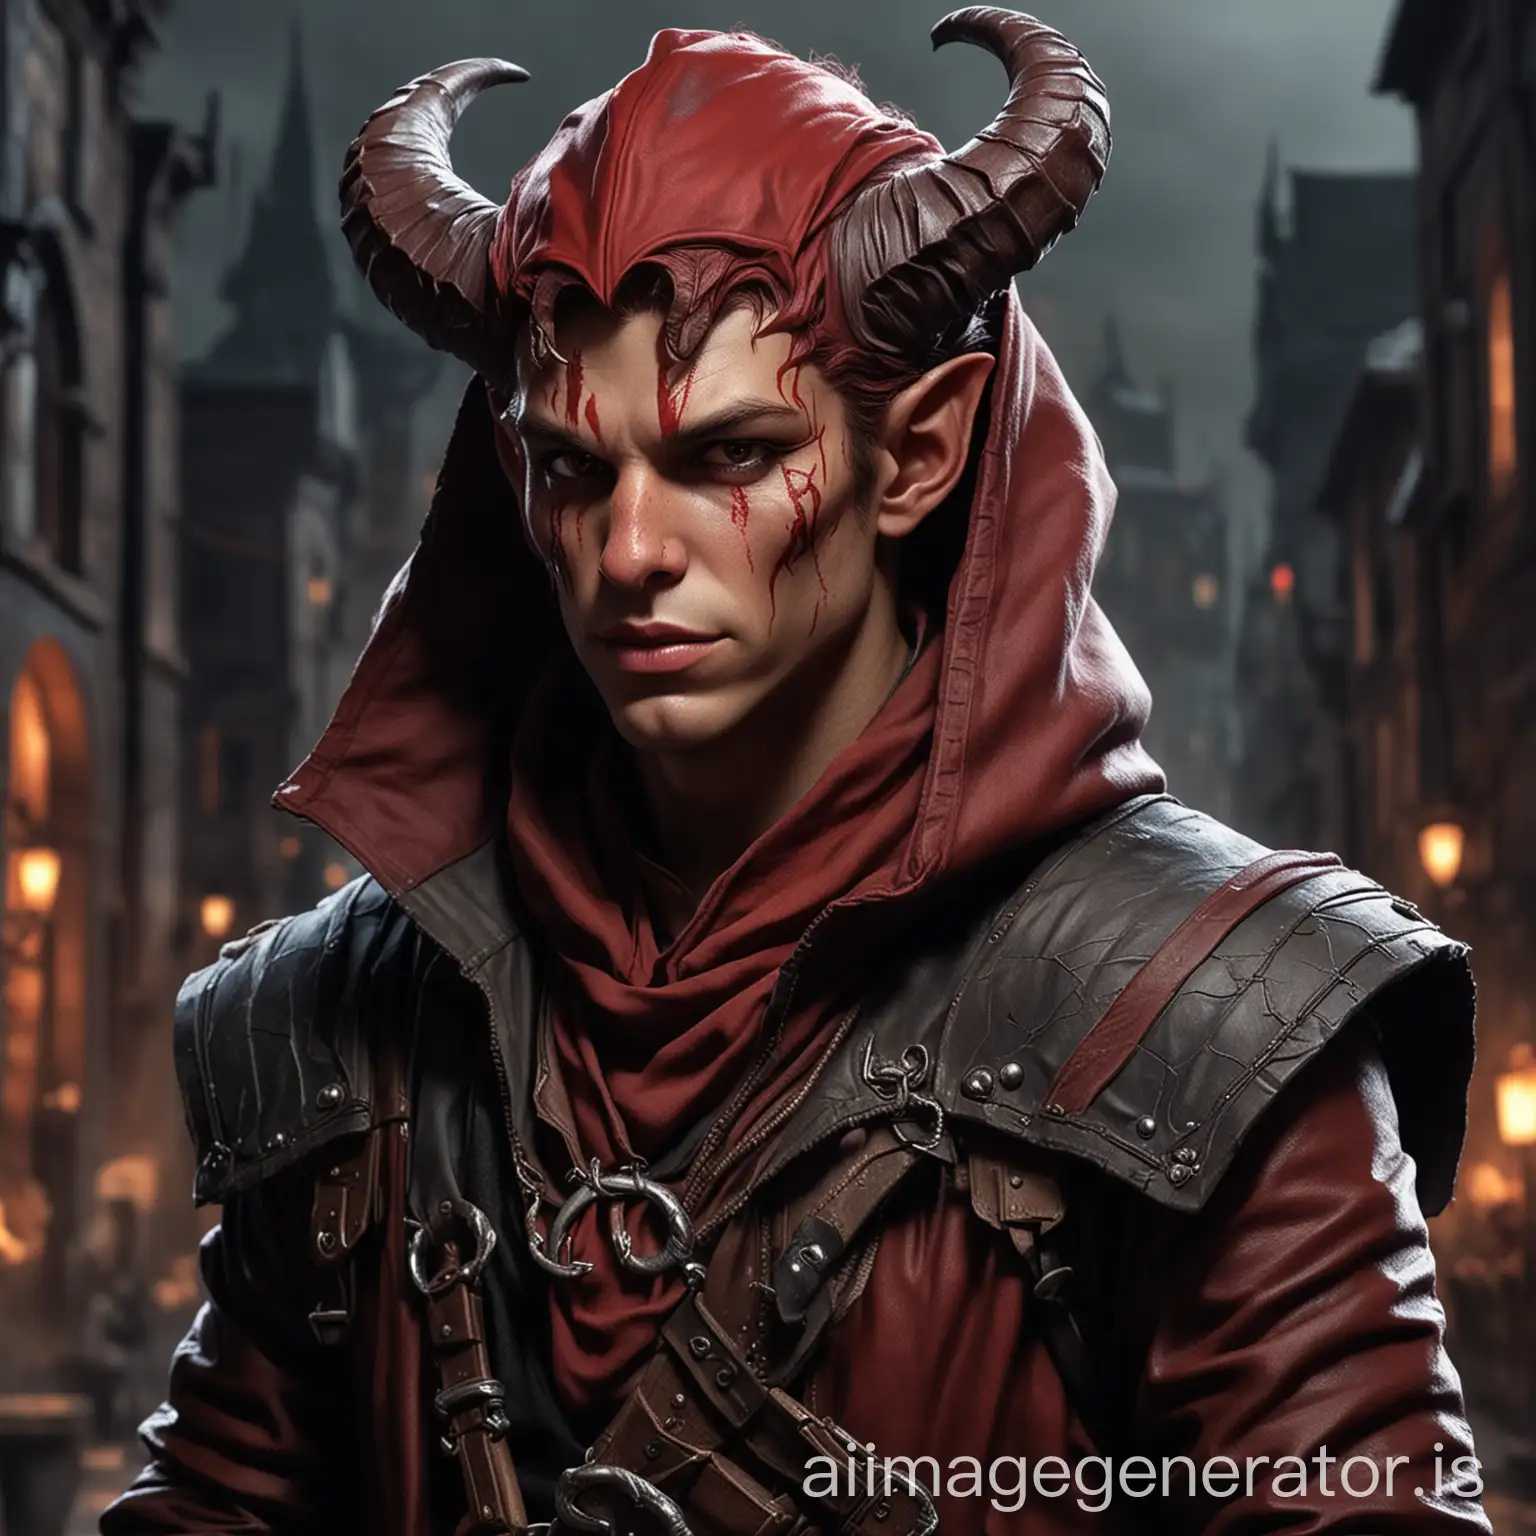 Short Young Male Tiefling Rogue for DND with red skin and dark city background wearing a hood, made less threatening